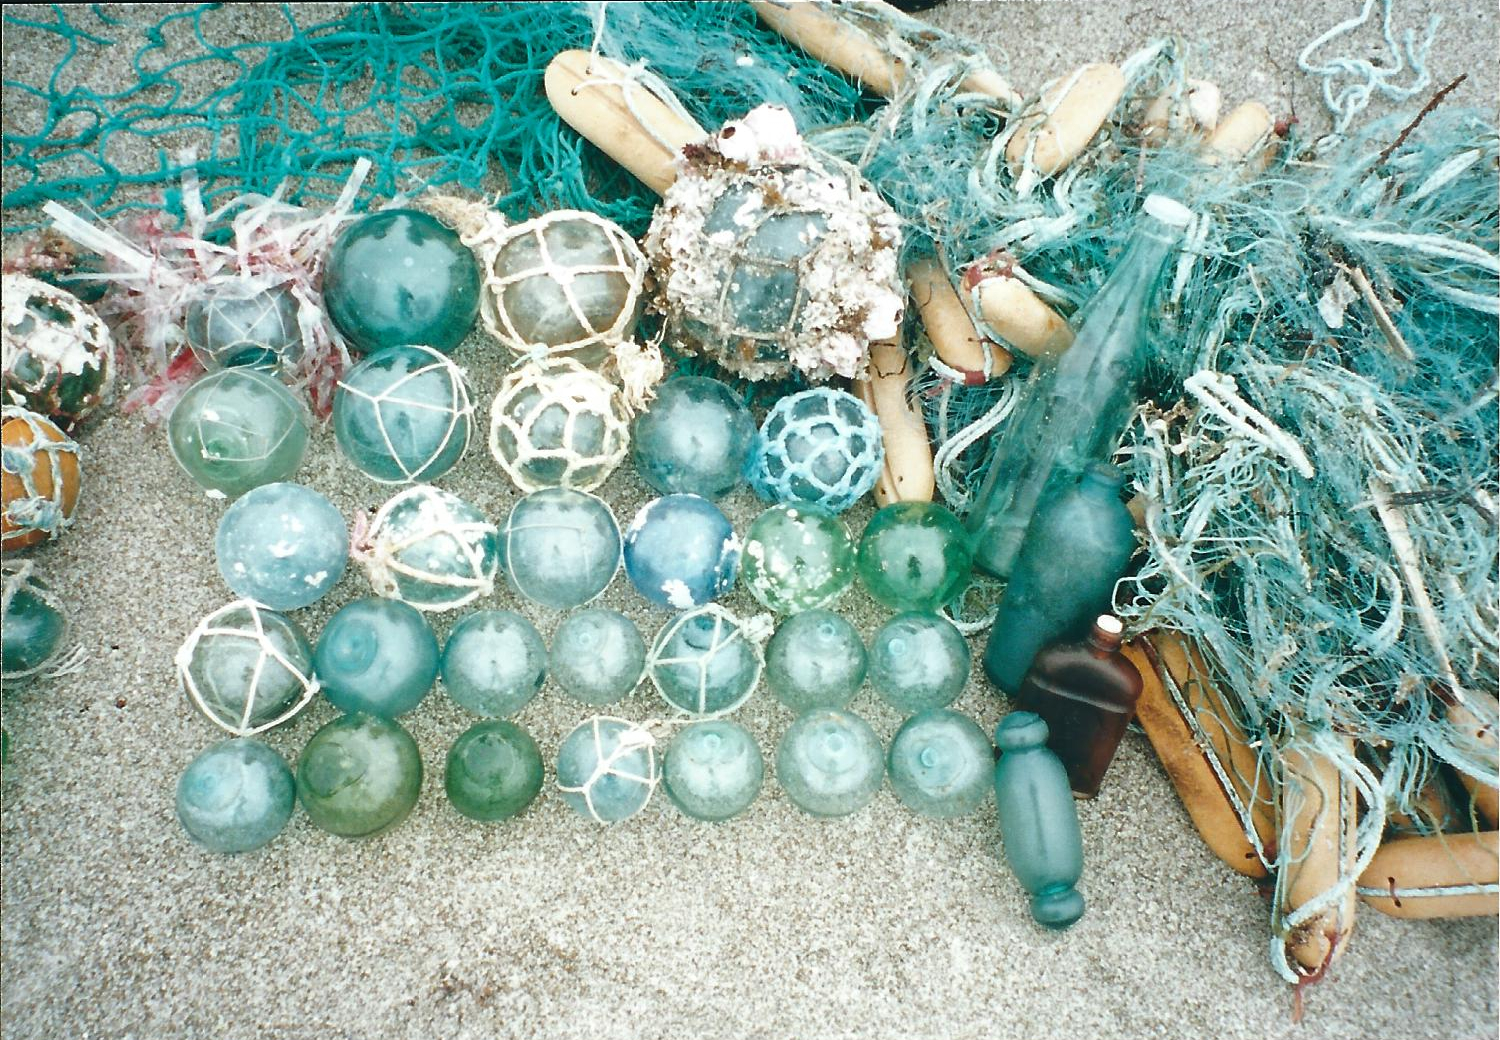 All in a Day's Work: Japanese Glass Fishing Floats – Beachcombing